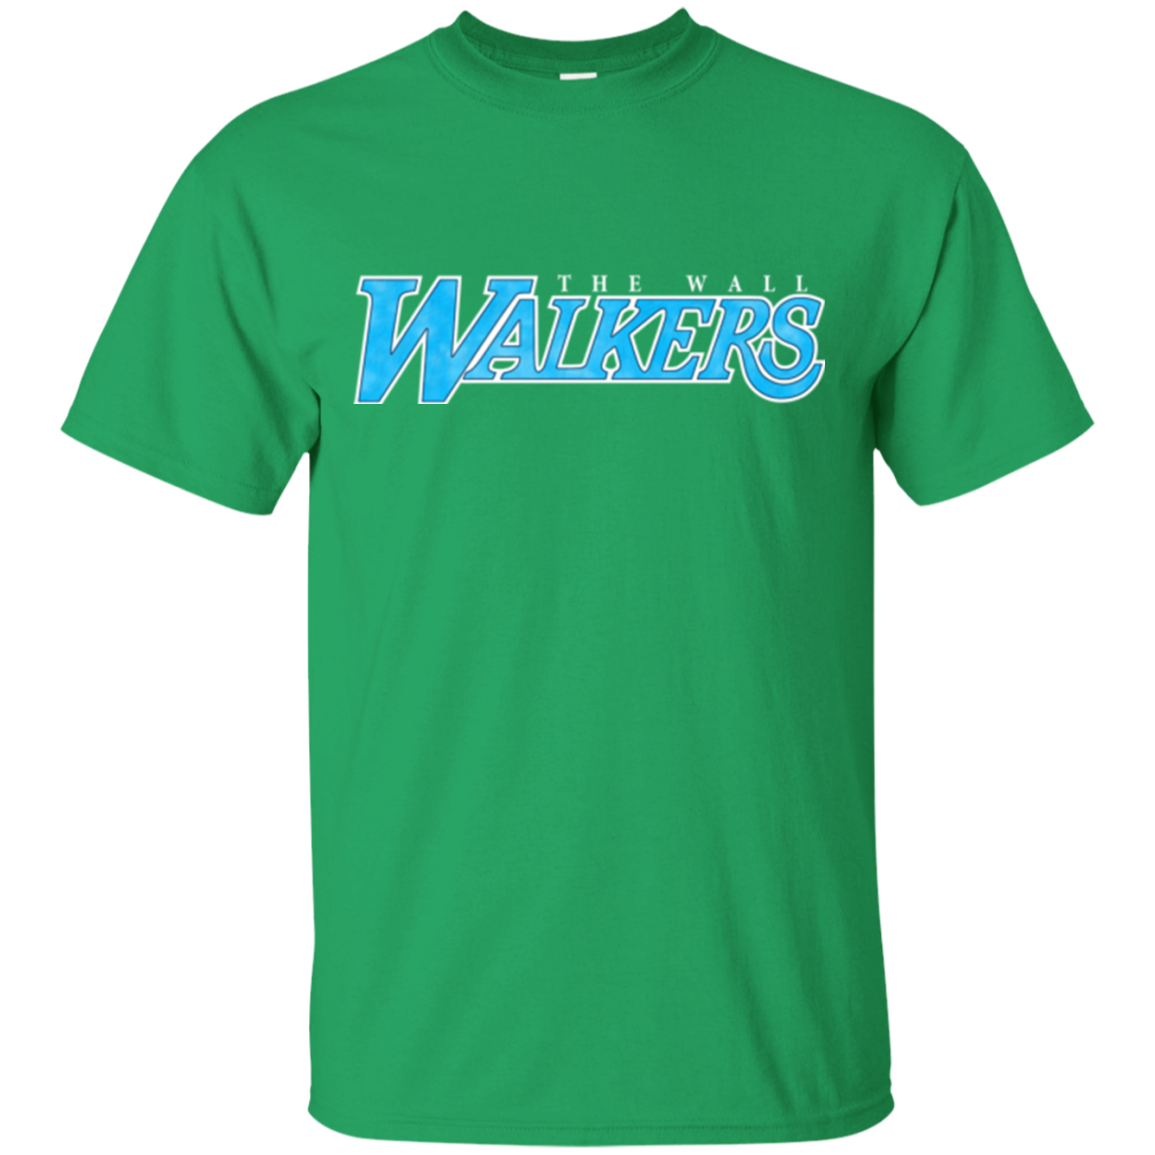 The Wall Walkers T-Shirt